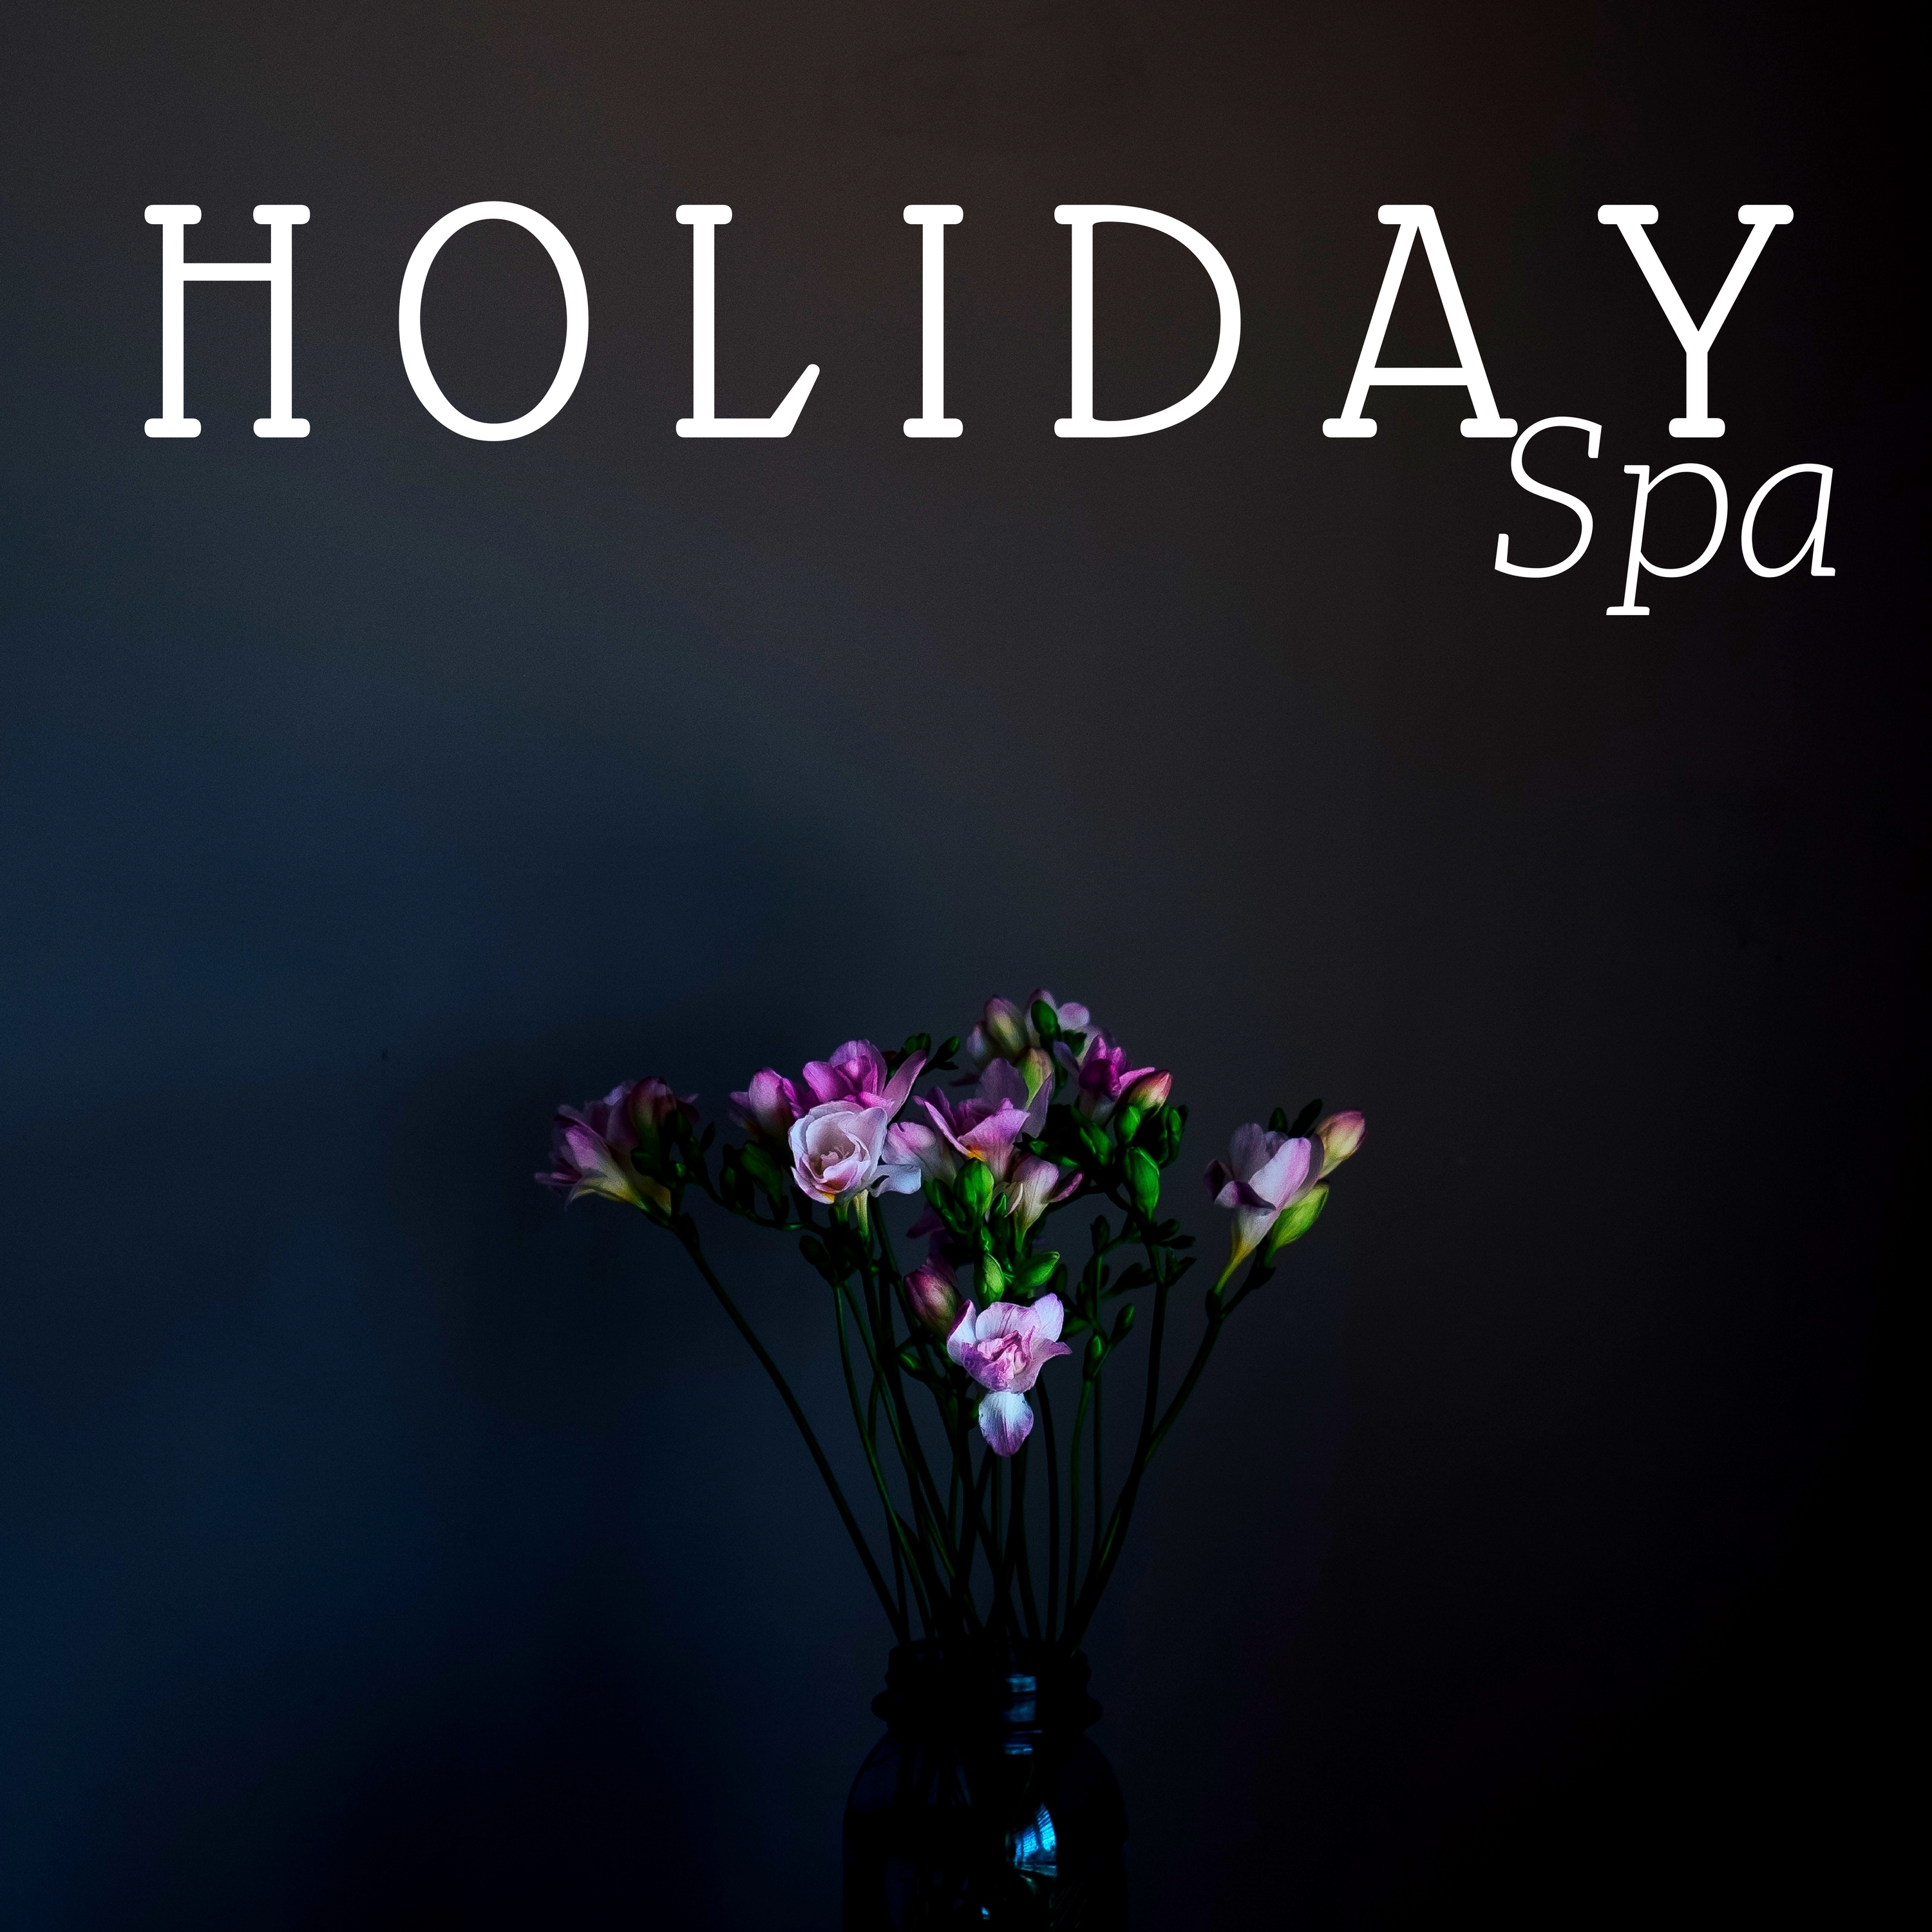 Holiday Spa: Relaxing Massage, Well Being, Ayurveda, Health Benefits, Meditation Music